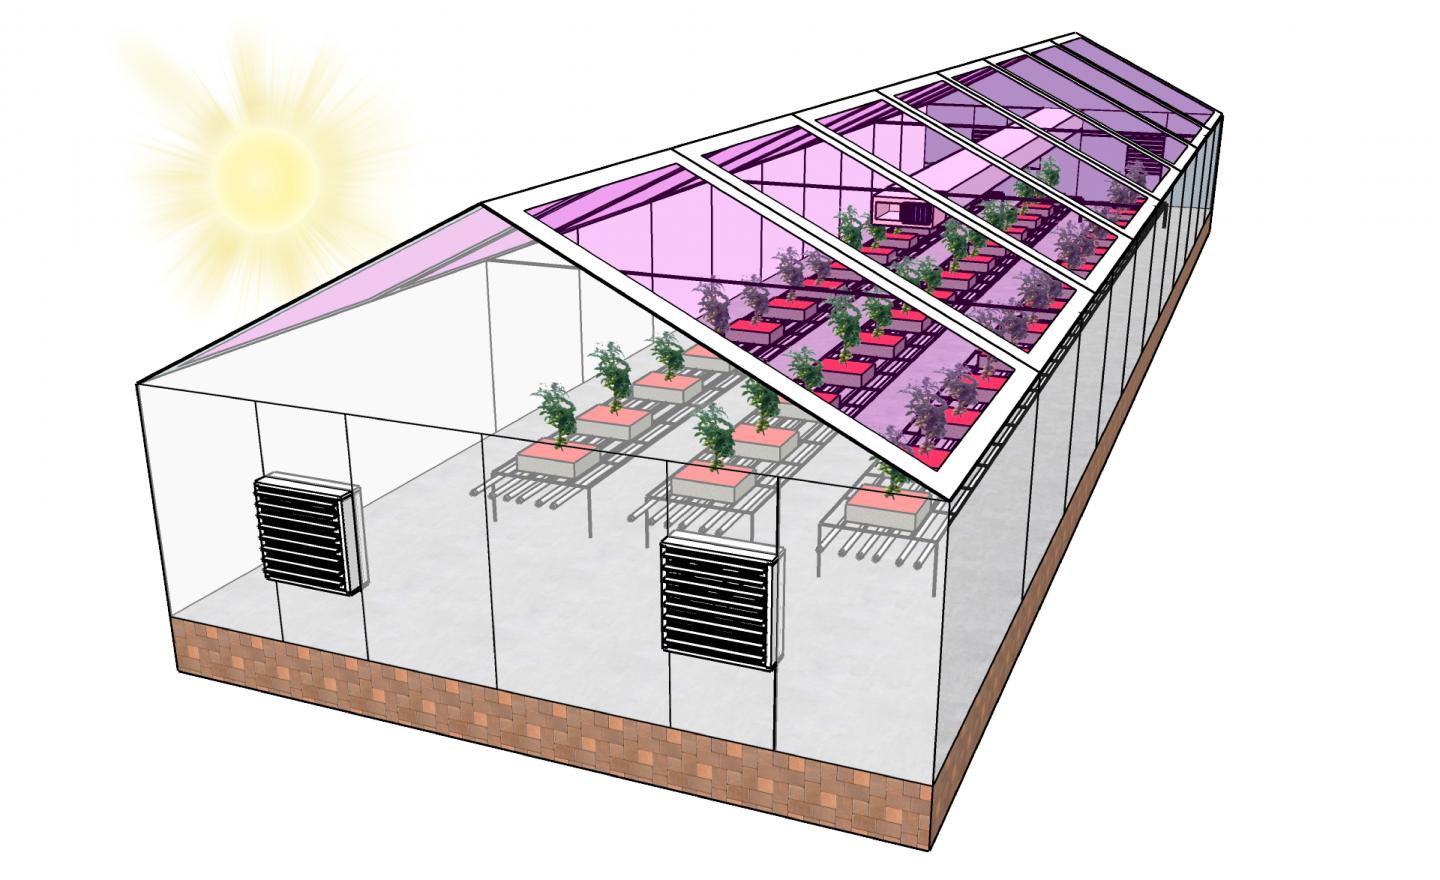 Powering Greenhouses With See-Through Solar Panels